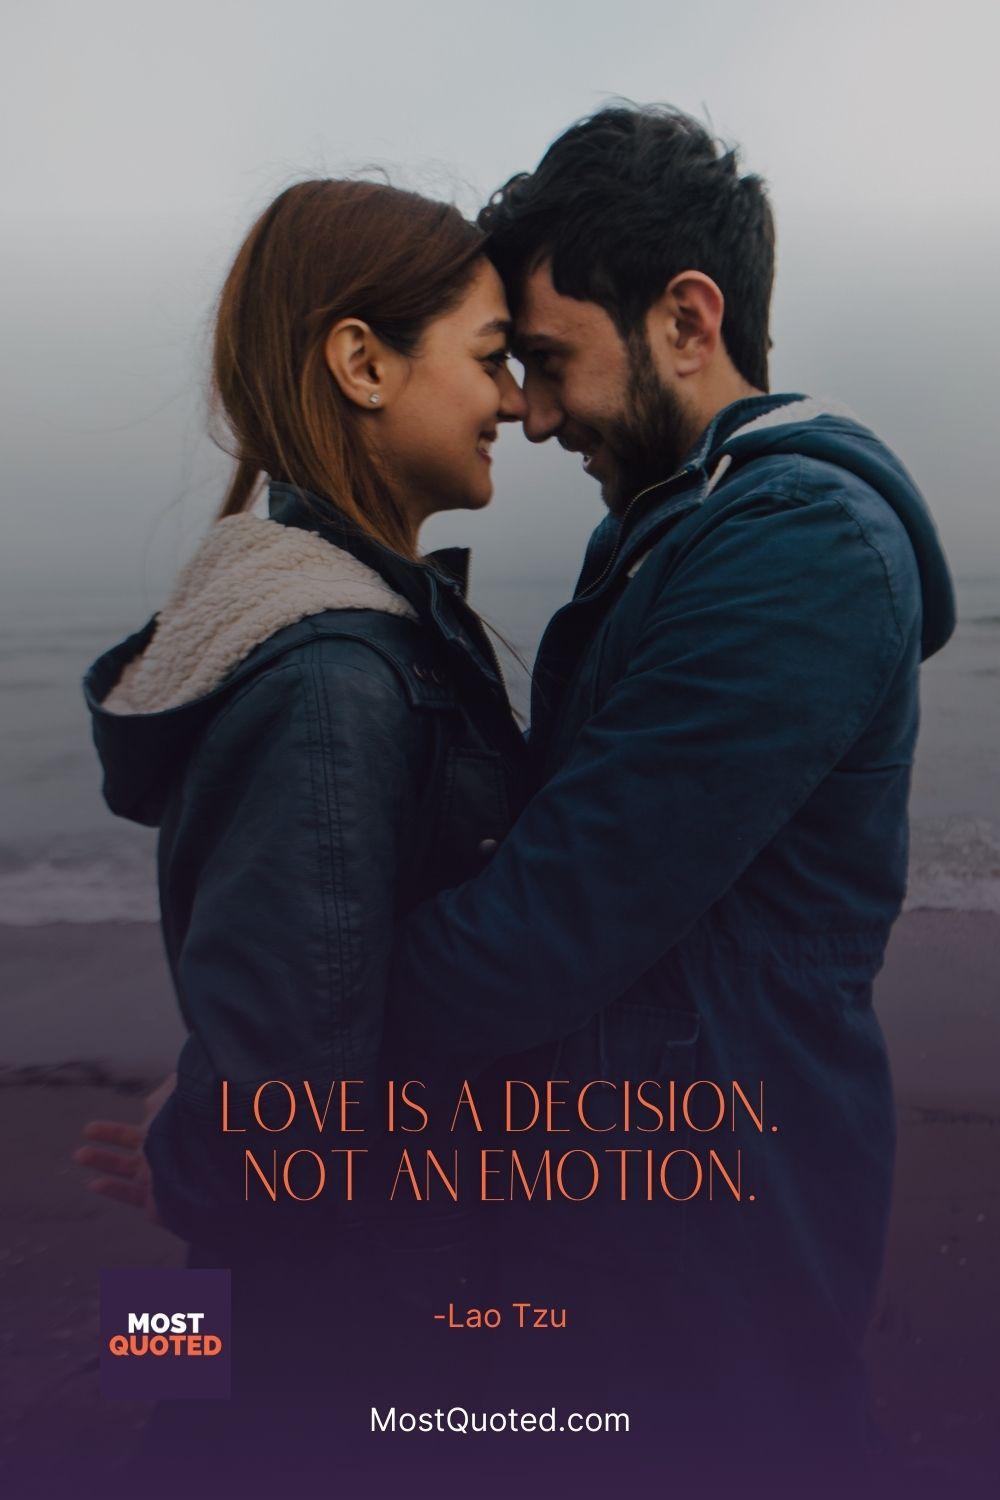 Love is a decision. Not an emotion. - Lao Tzu